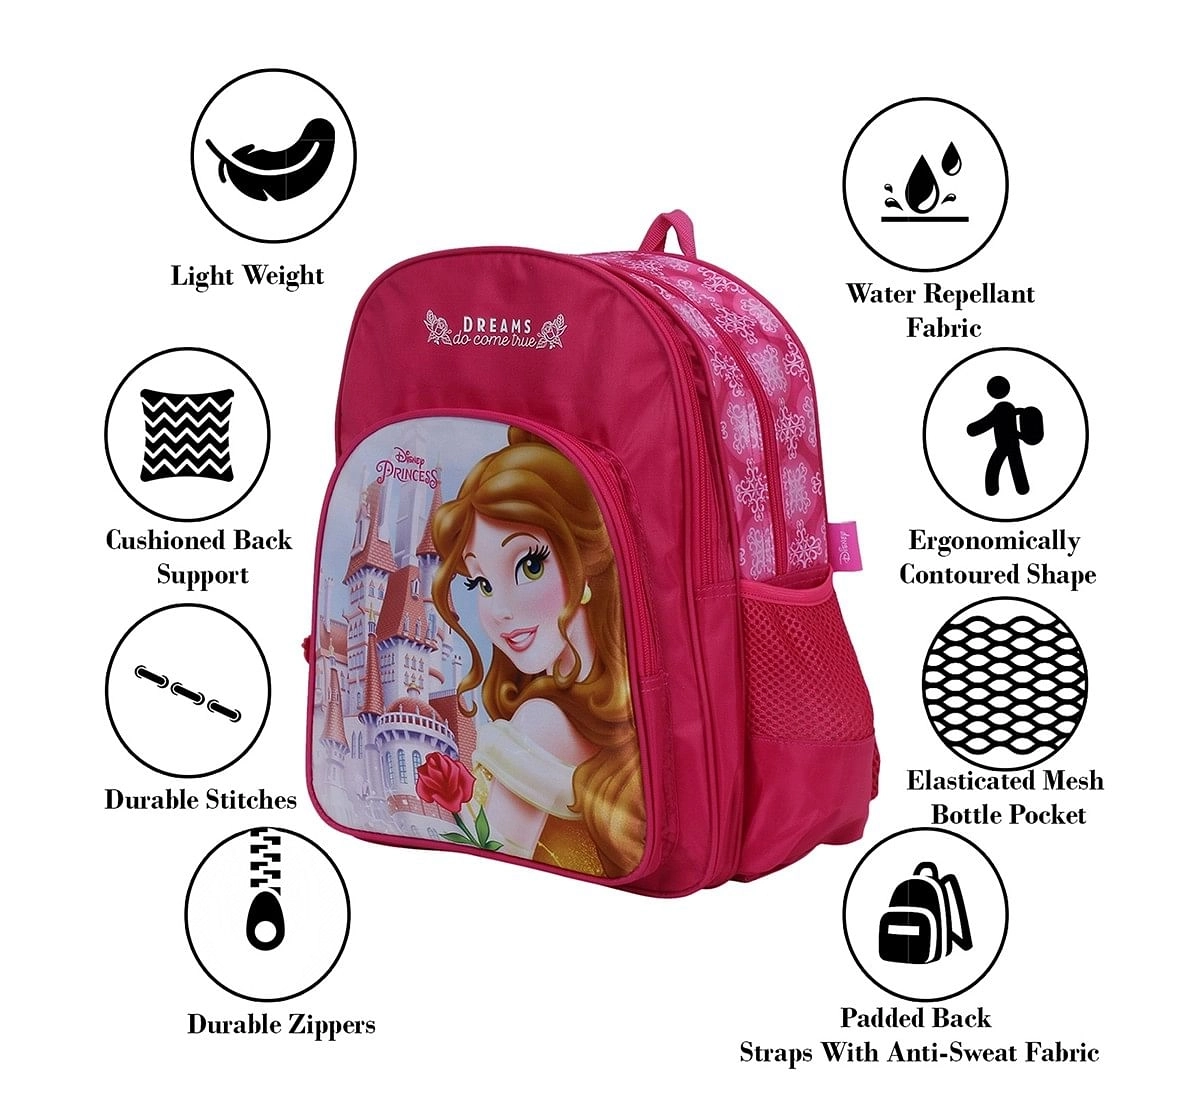 Disney Princess Castle 14" Backpack Bags for age 3Y+ 